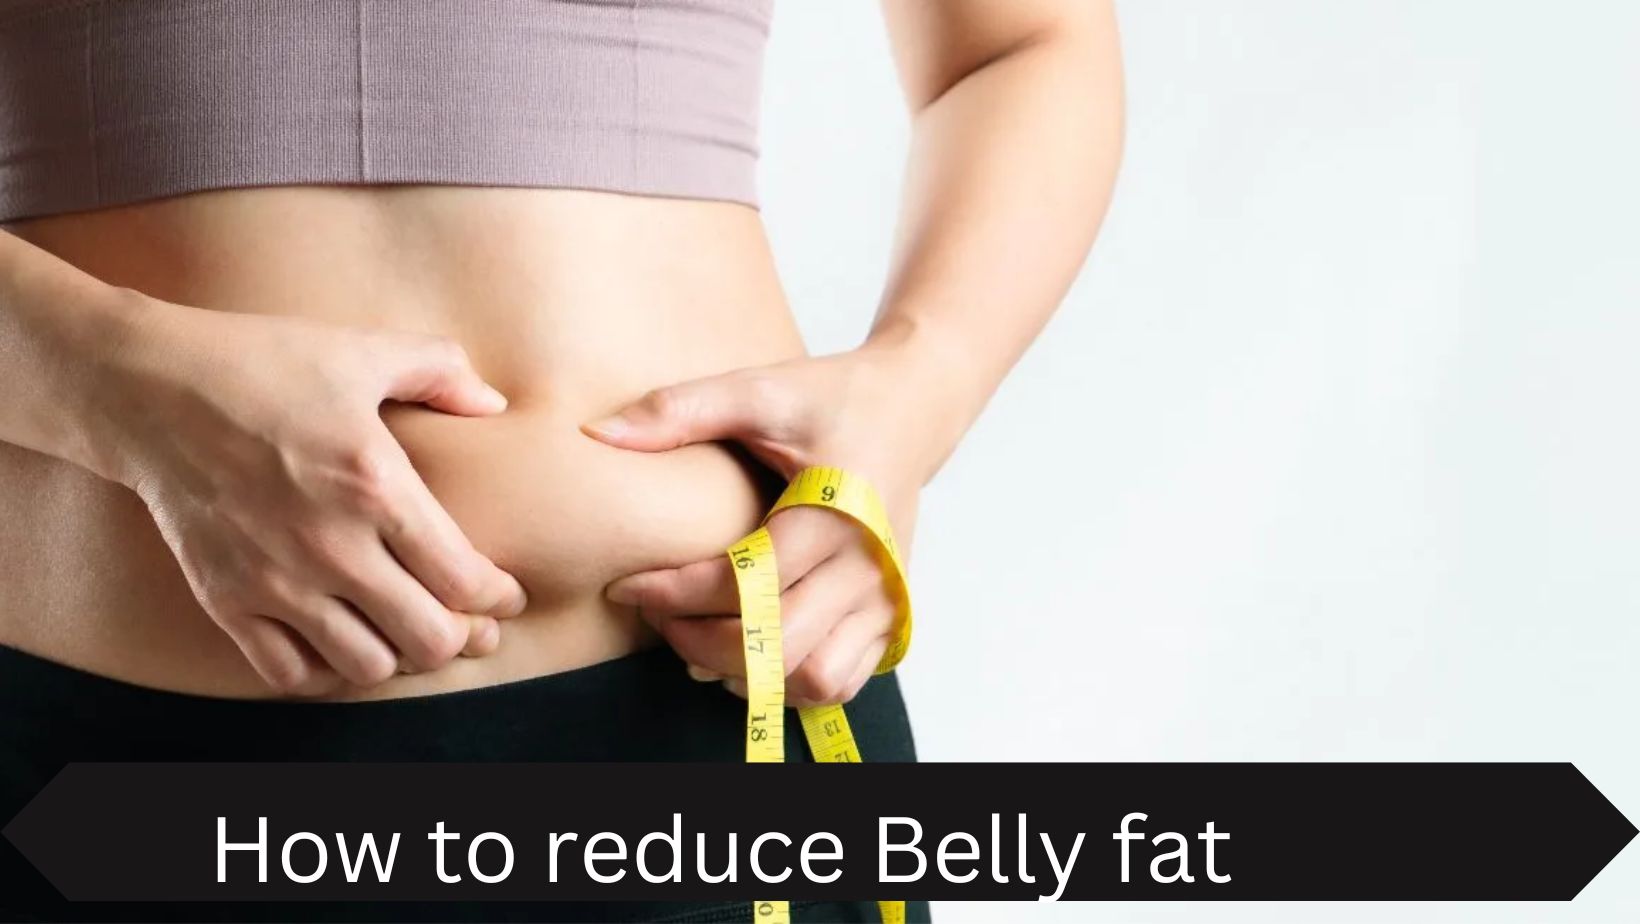 Tips to reduce belly fat within 14 days